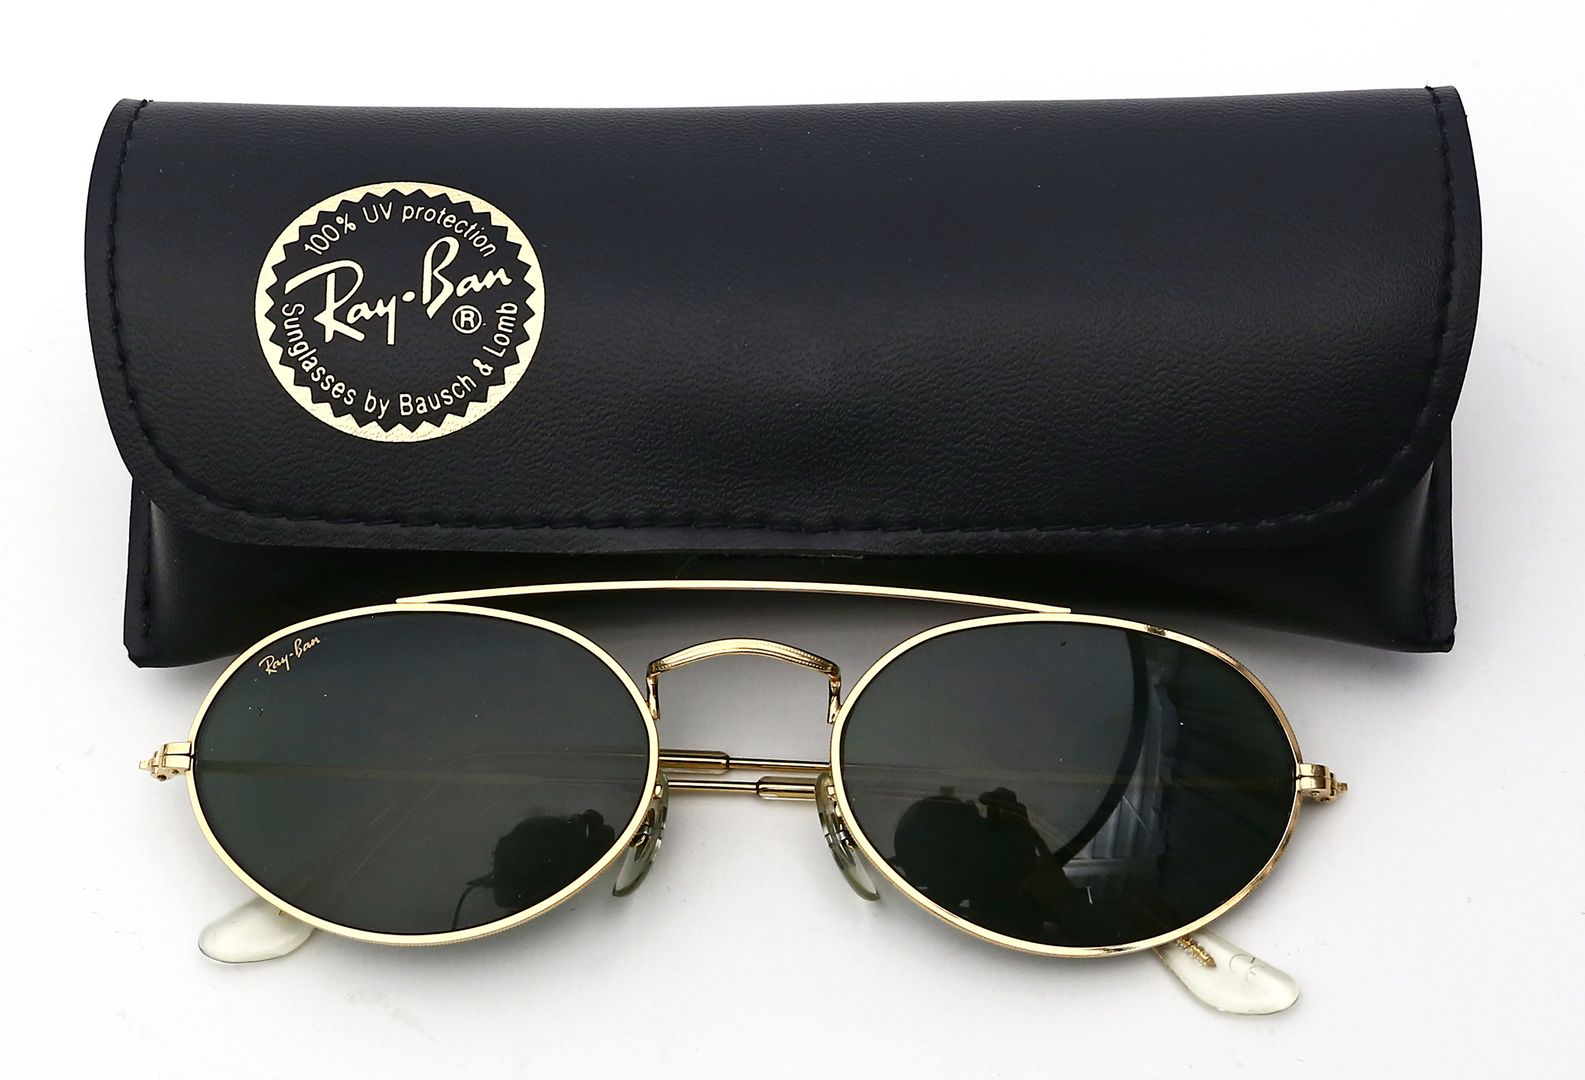 Sonnenbrille "Classic Style 1 USA", Ray-Ban